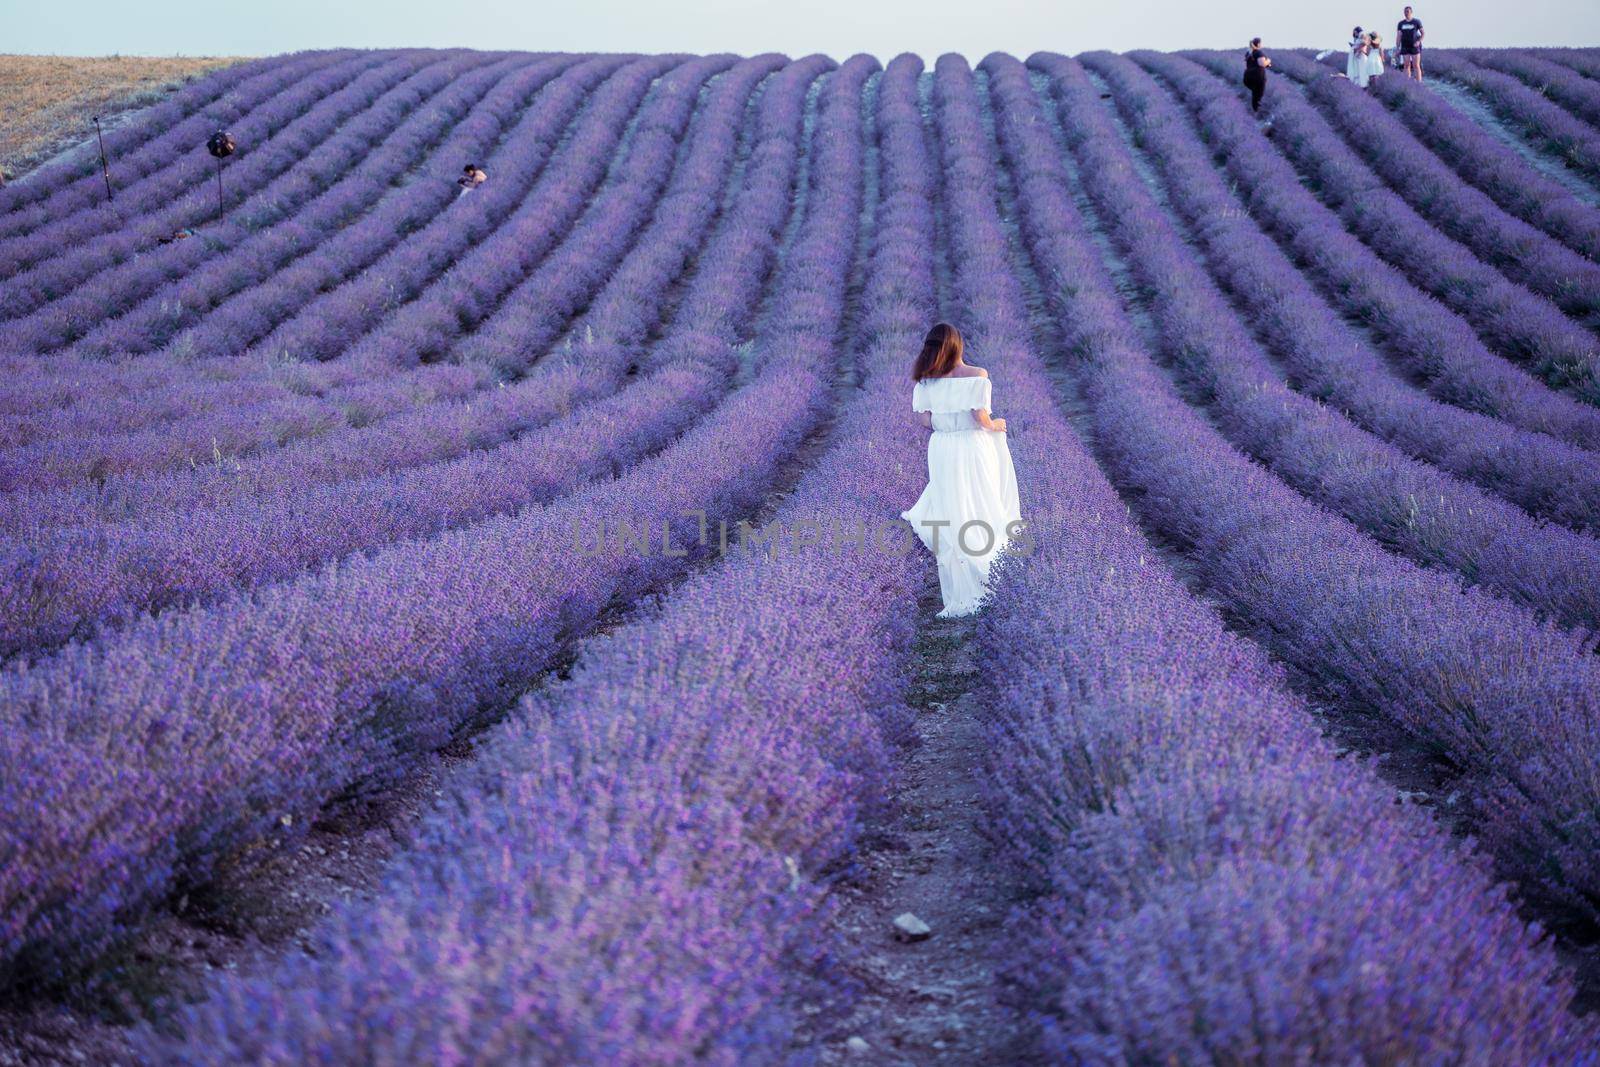 Among the lavender fields. A beautiful girl in a white dress runs against the background of a large lavender field by Matiunina